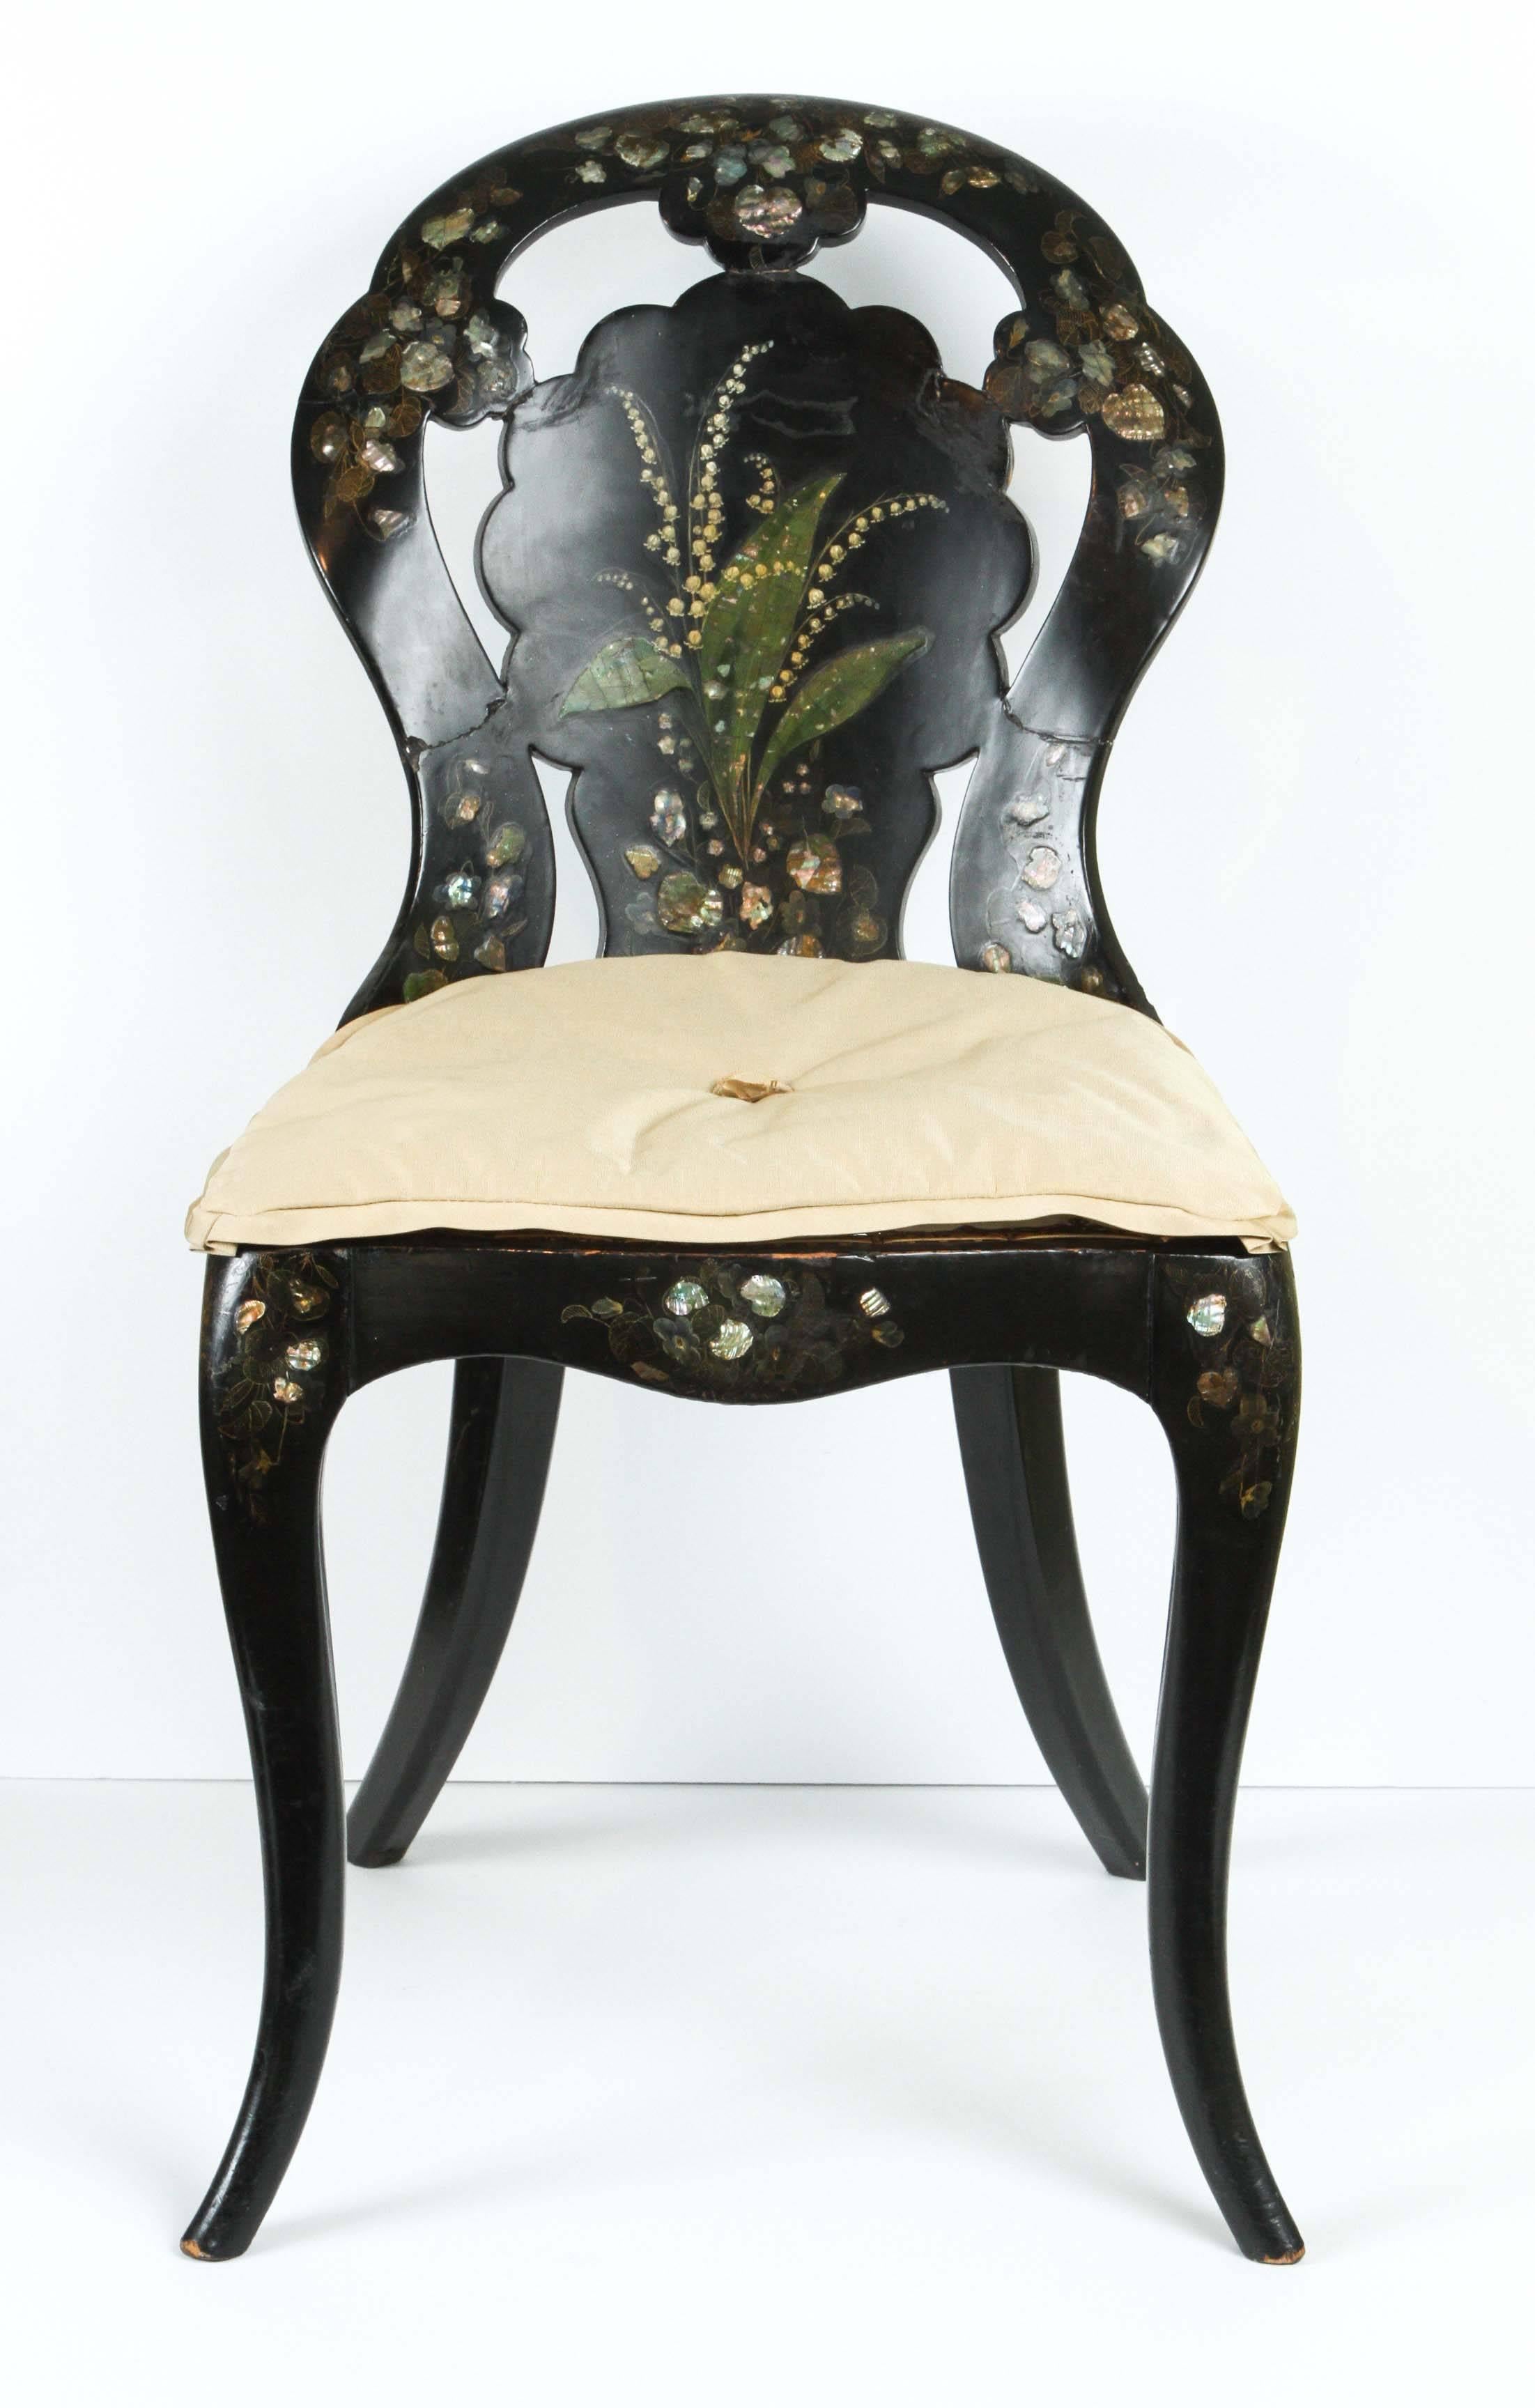 A Papier-Mache chair in black lacquer finish with mother-of-pearl inlay details (including a charming spray of Lily of the Valley) , circa 1850. The seat is newly caned with a squab cushion in Suzanne Rheinstein Hollyhock for Lee Jofa 